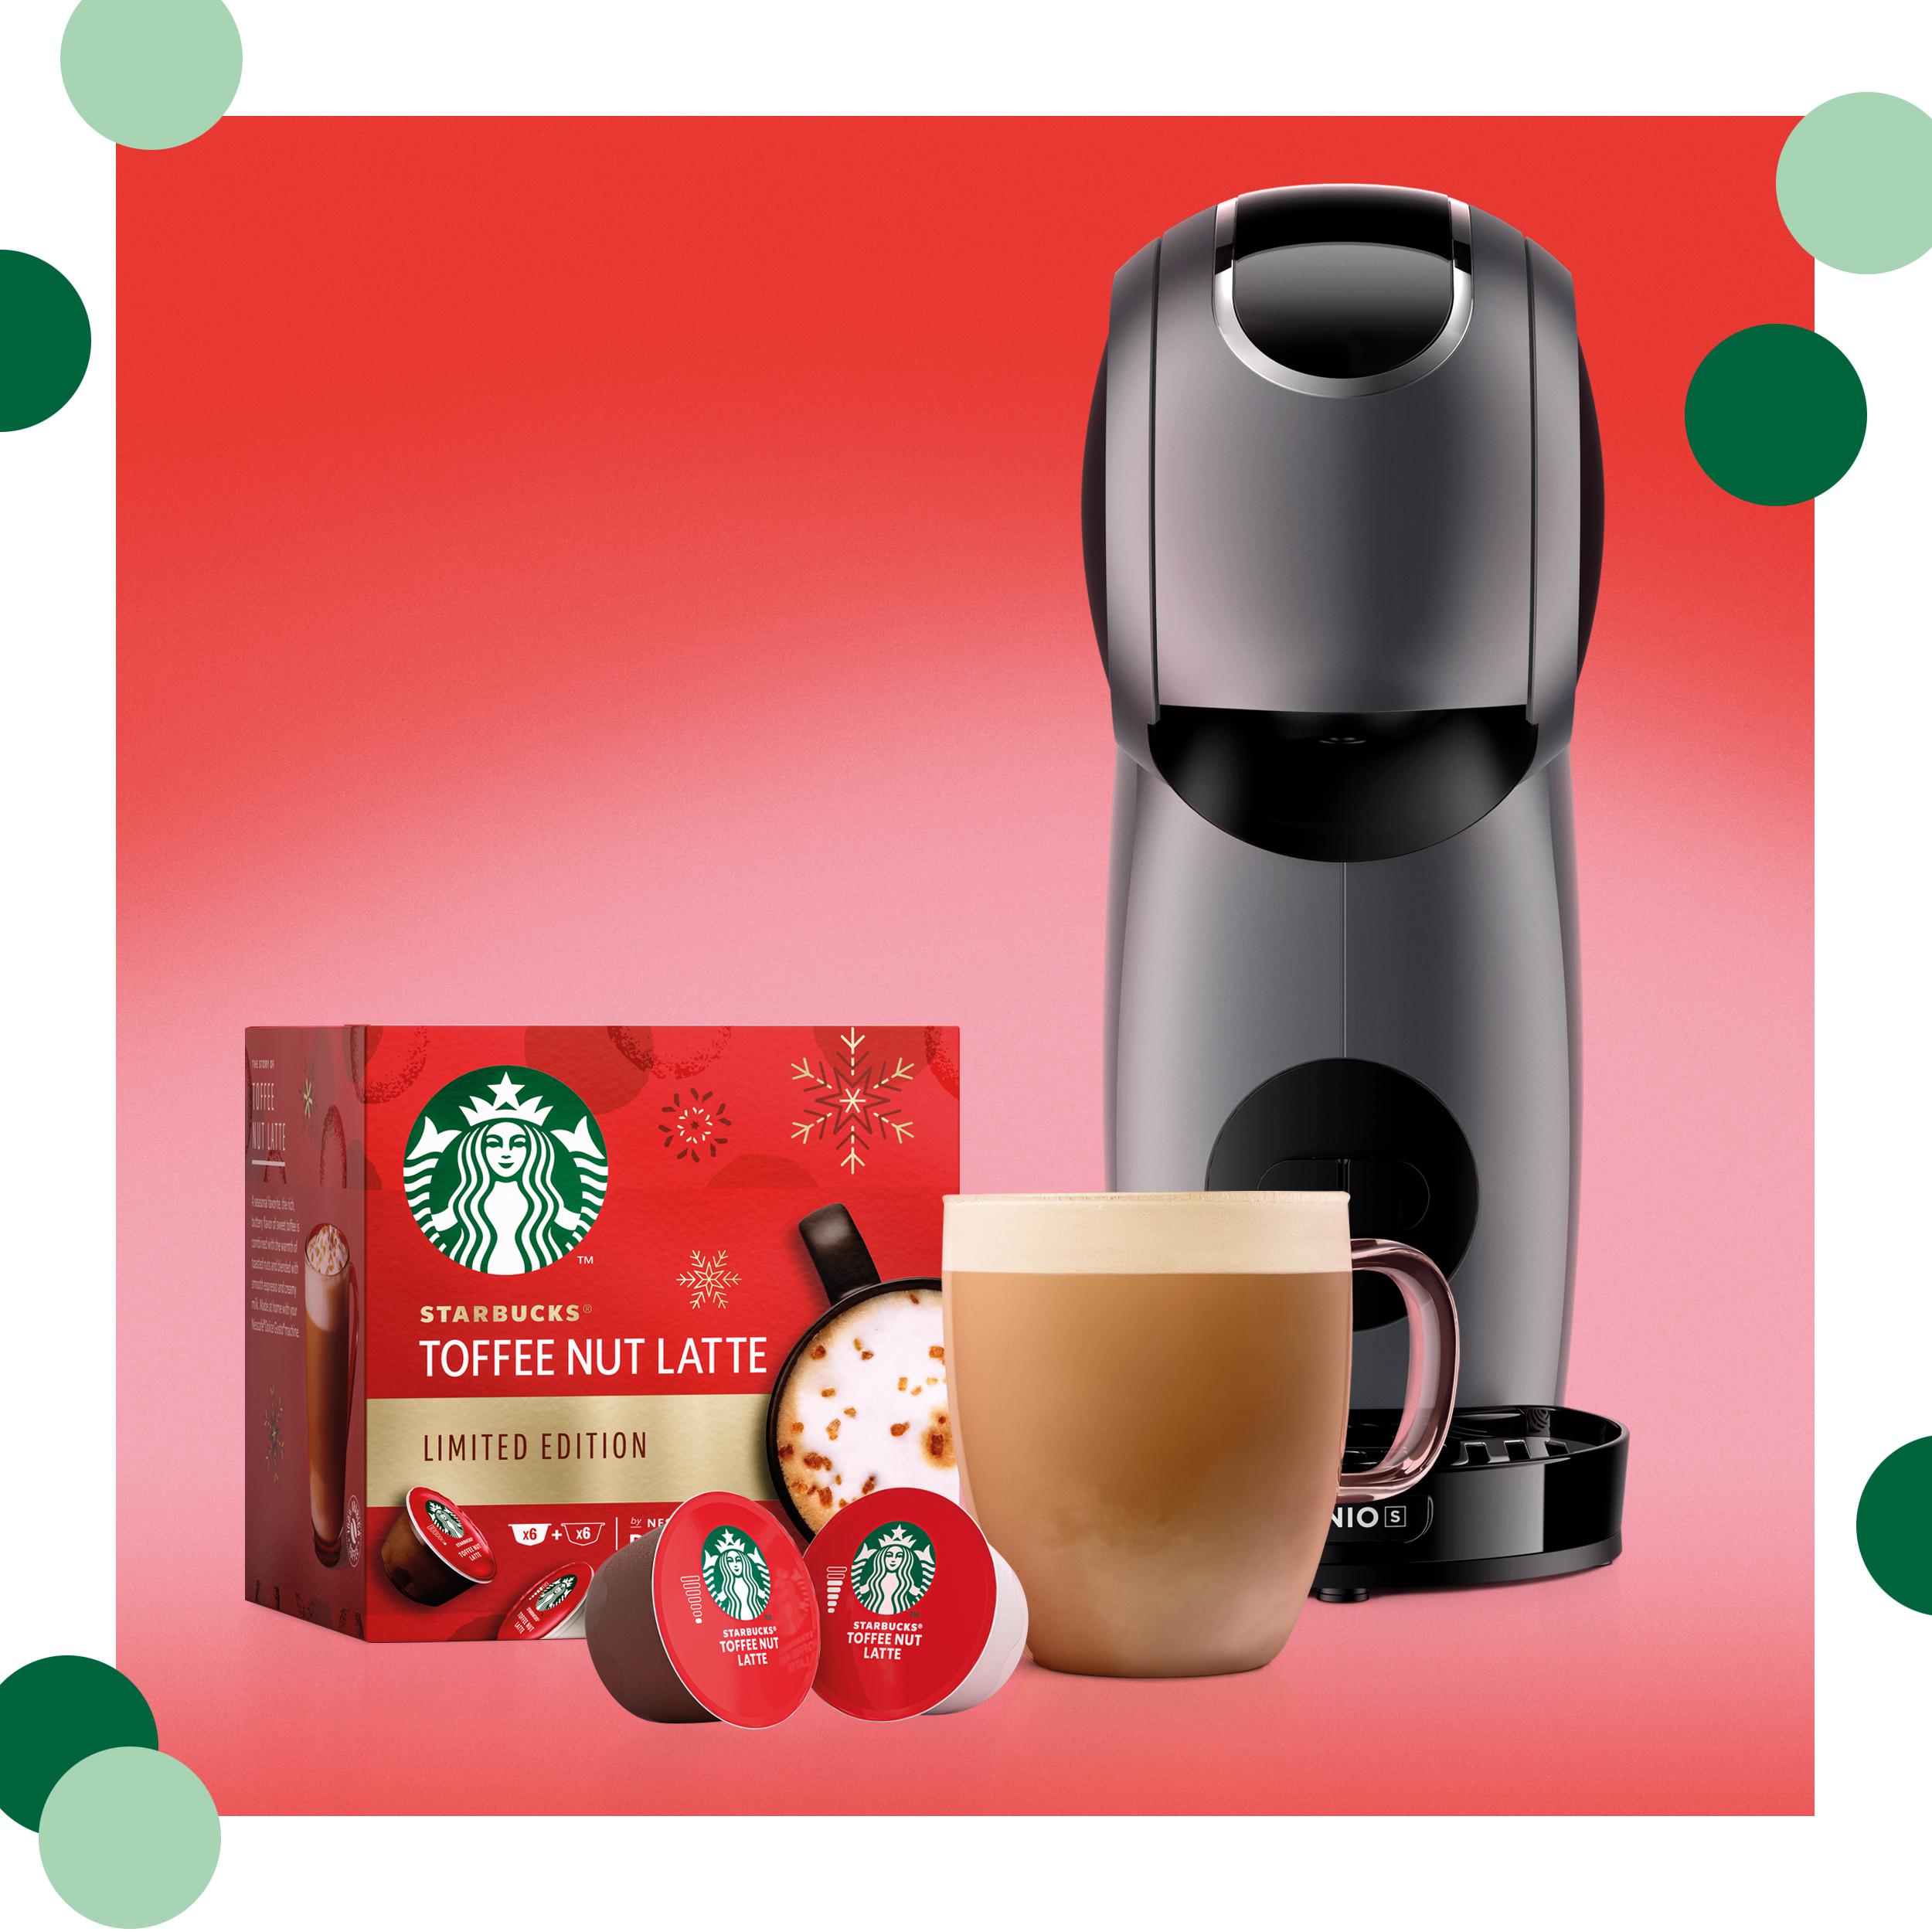 Instant Starbucks Toffee Nut Latte available at S'pore supermarkets for  S$5.45 per box -  - News from Singapore, Asia and around the  world